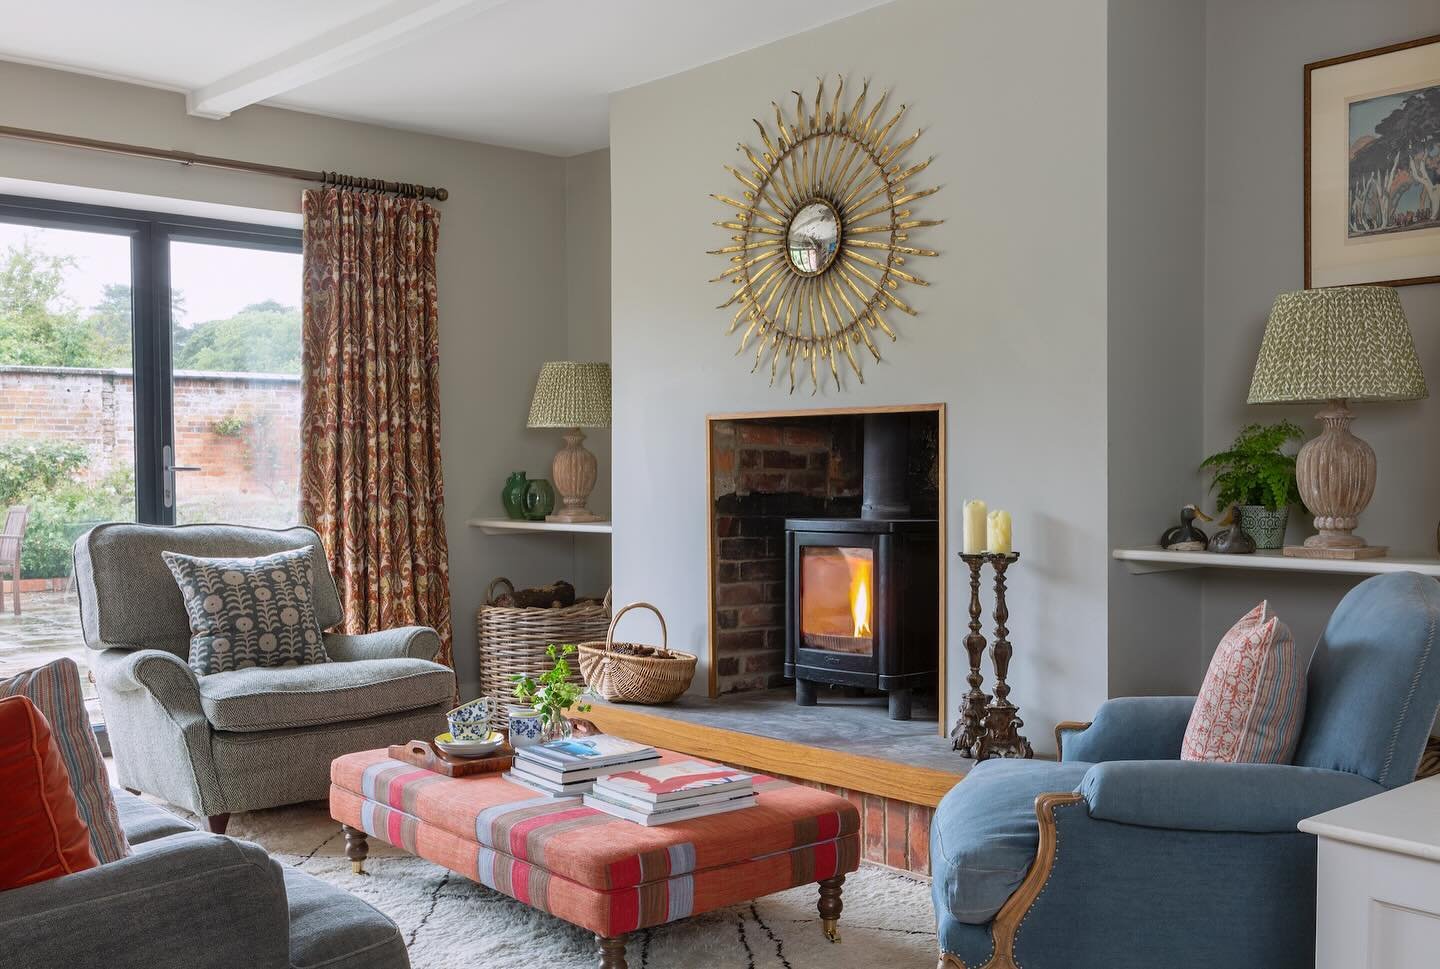 Still lighting the fire in late April&hellip;? The Snug in our Hampshire country house project 📸 @james_mcdonald_photography #interiordesign #countryhousestyle #interiorsaddict #howwedwell #englishcountryhouse #sittingroomdecor #interiorstyling #sit